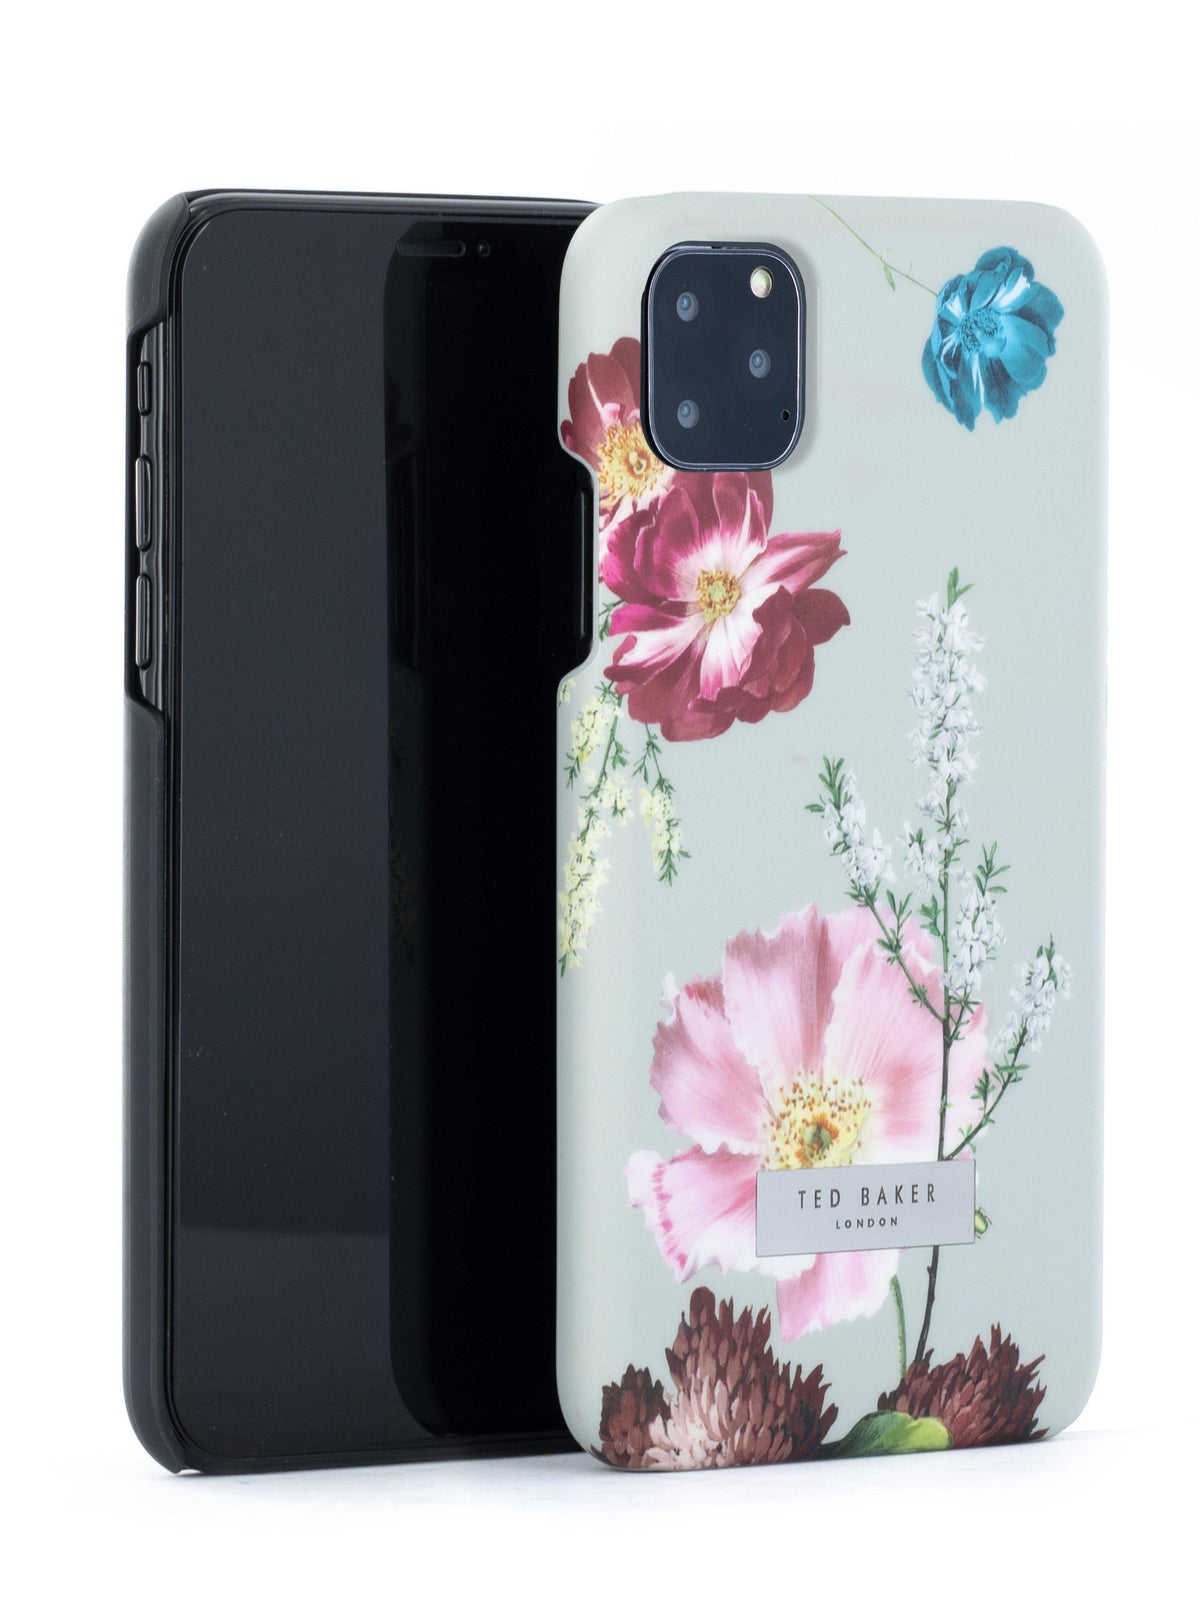 [OPEN BOX] TED BAKER Forest Fruits Hard Shell Case for iPhone 11 Pro